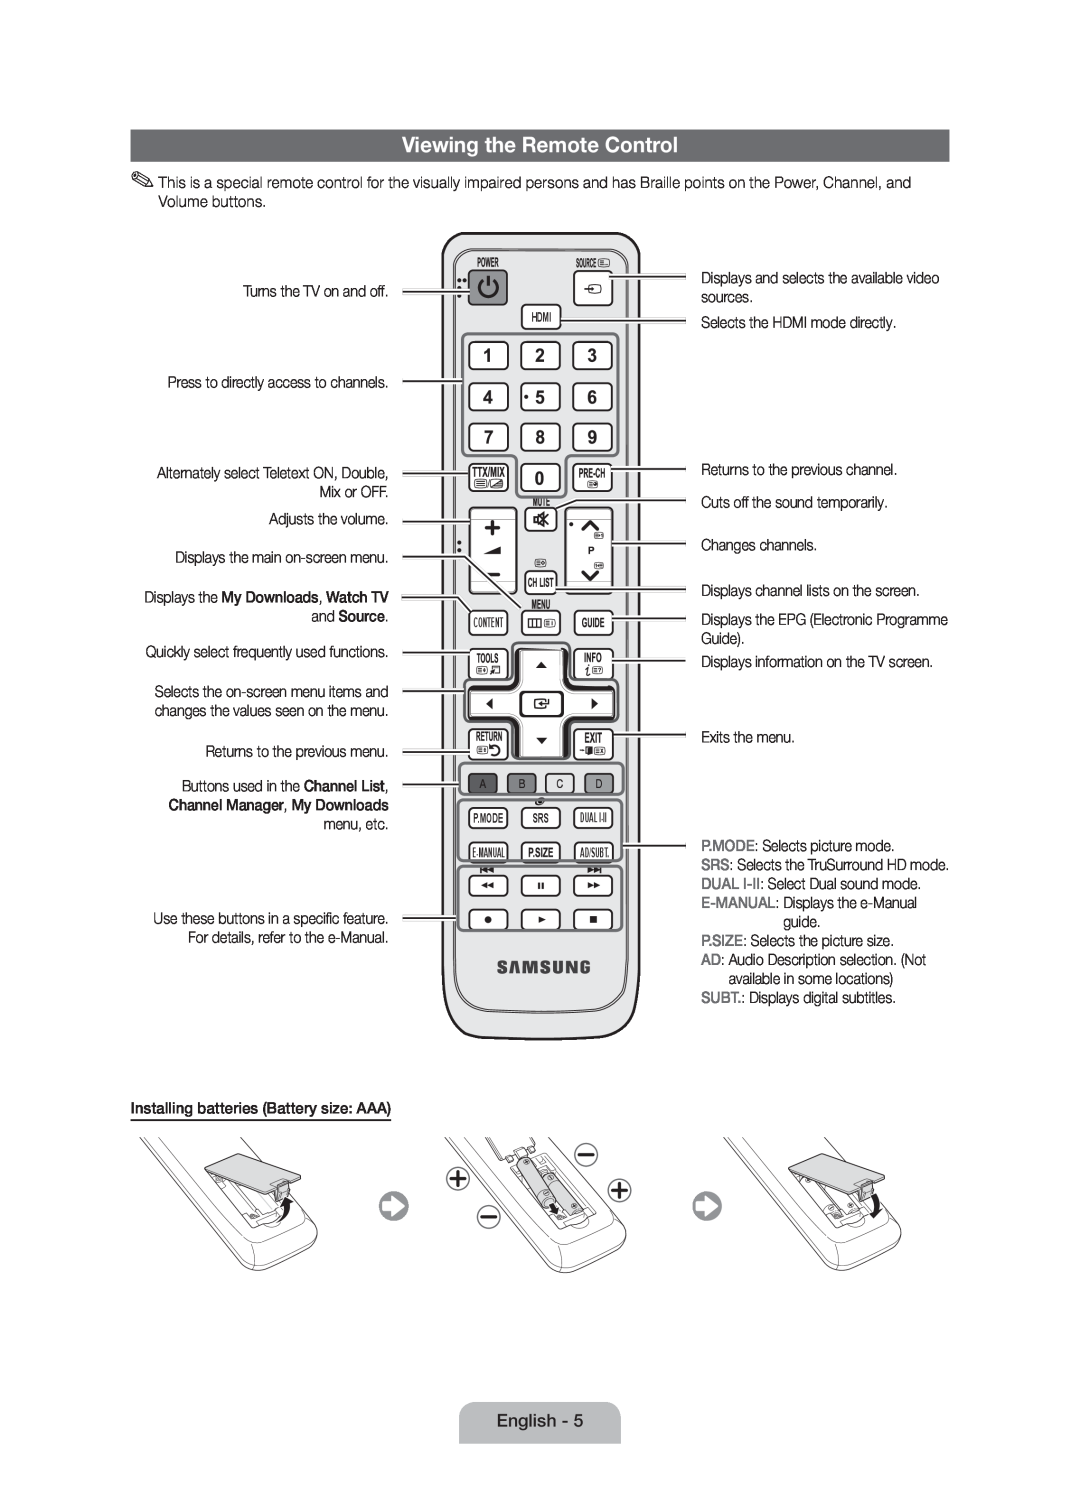 Samsung UE32D4010NWXZT, UE32D4010NWXZG, UE32D4000NWXZG, UE32D4000NWXTK, UE32D4010NWXXN manual Viewing the Remote Control 